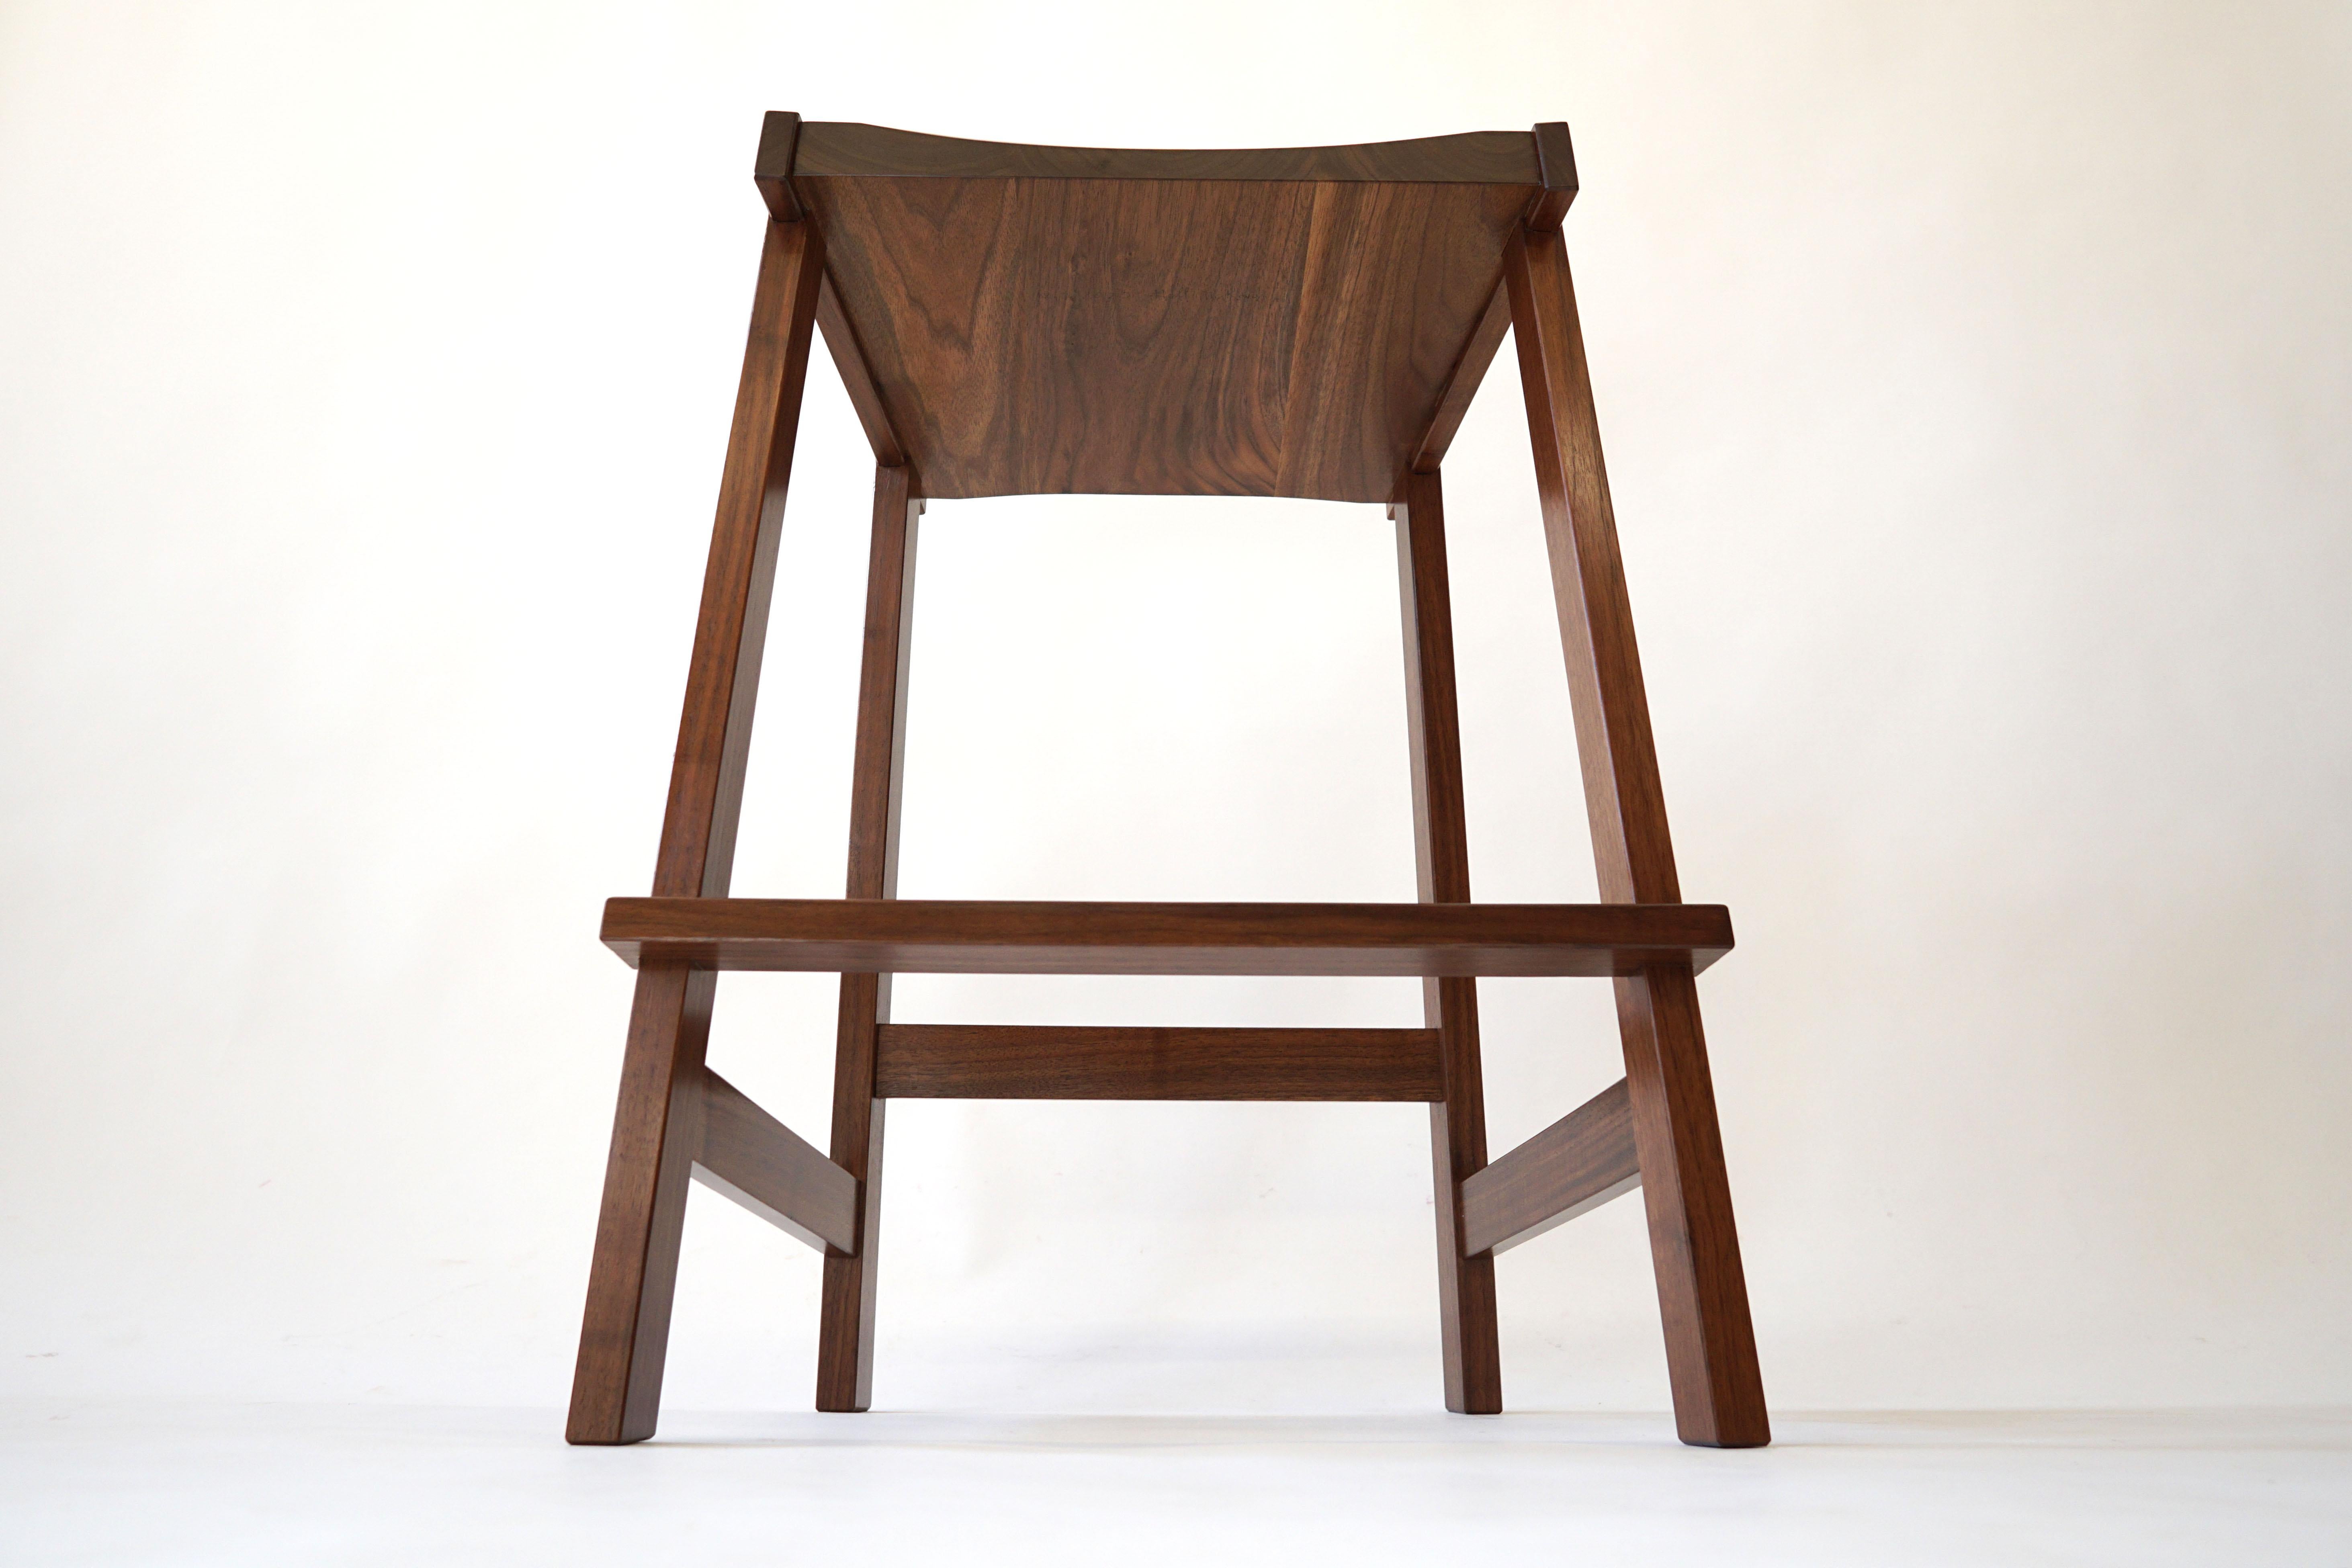 Contemporary Montrose Stool in Walnut, Exposed Joinery with a Hand Carved Seat For Sale